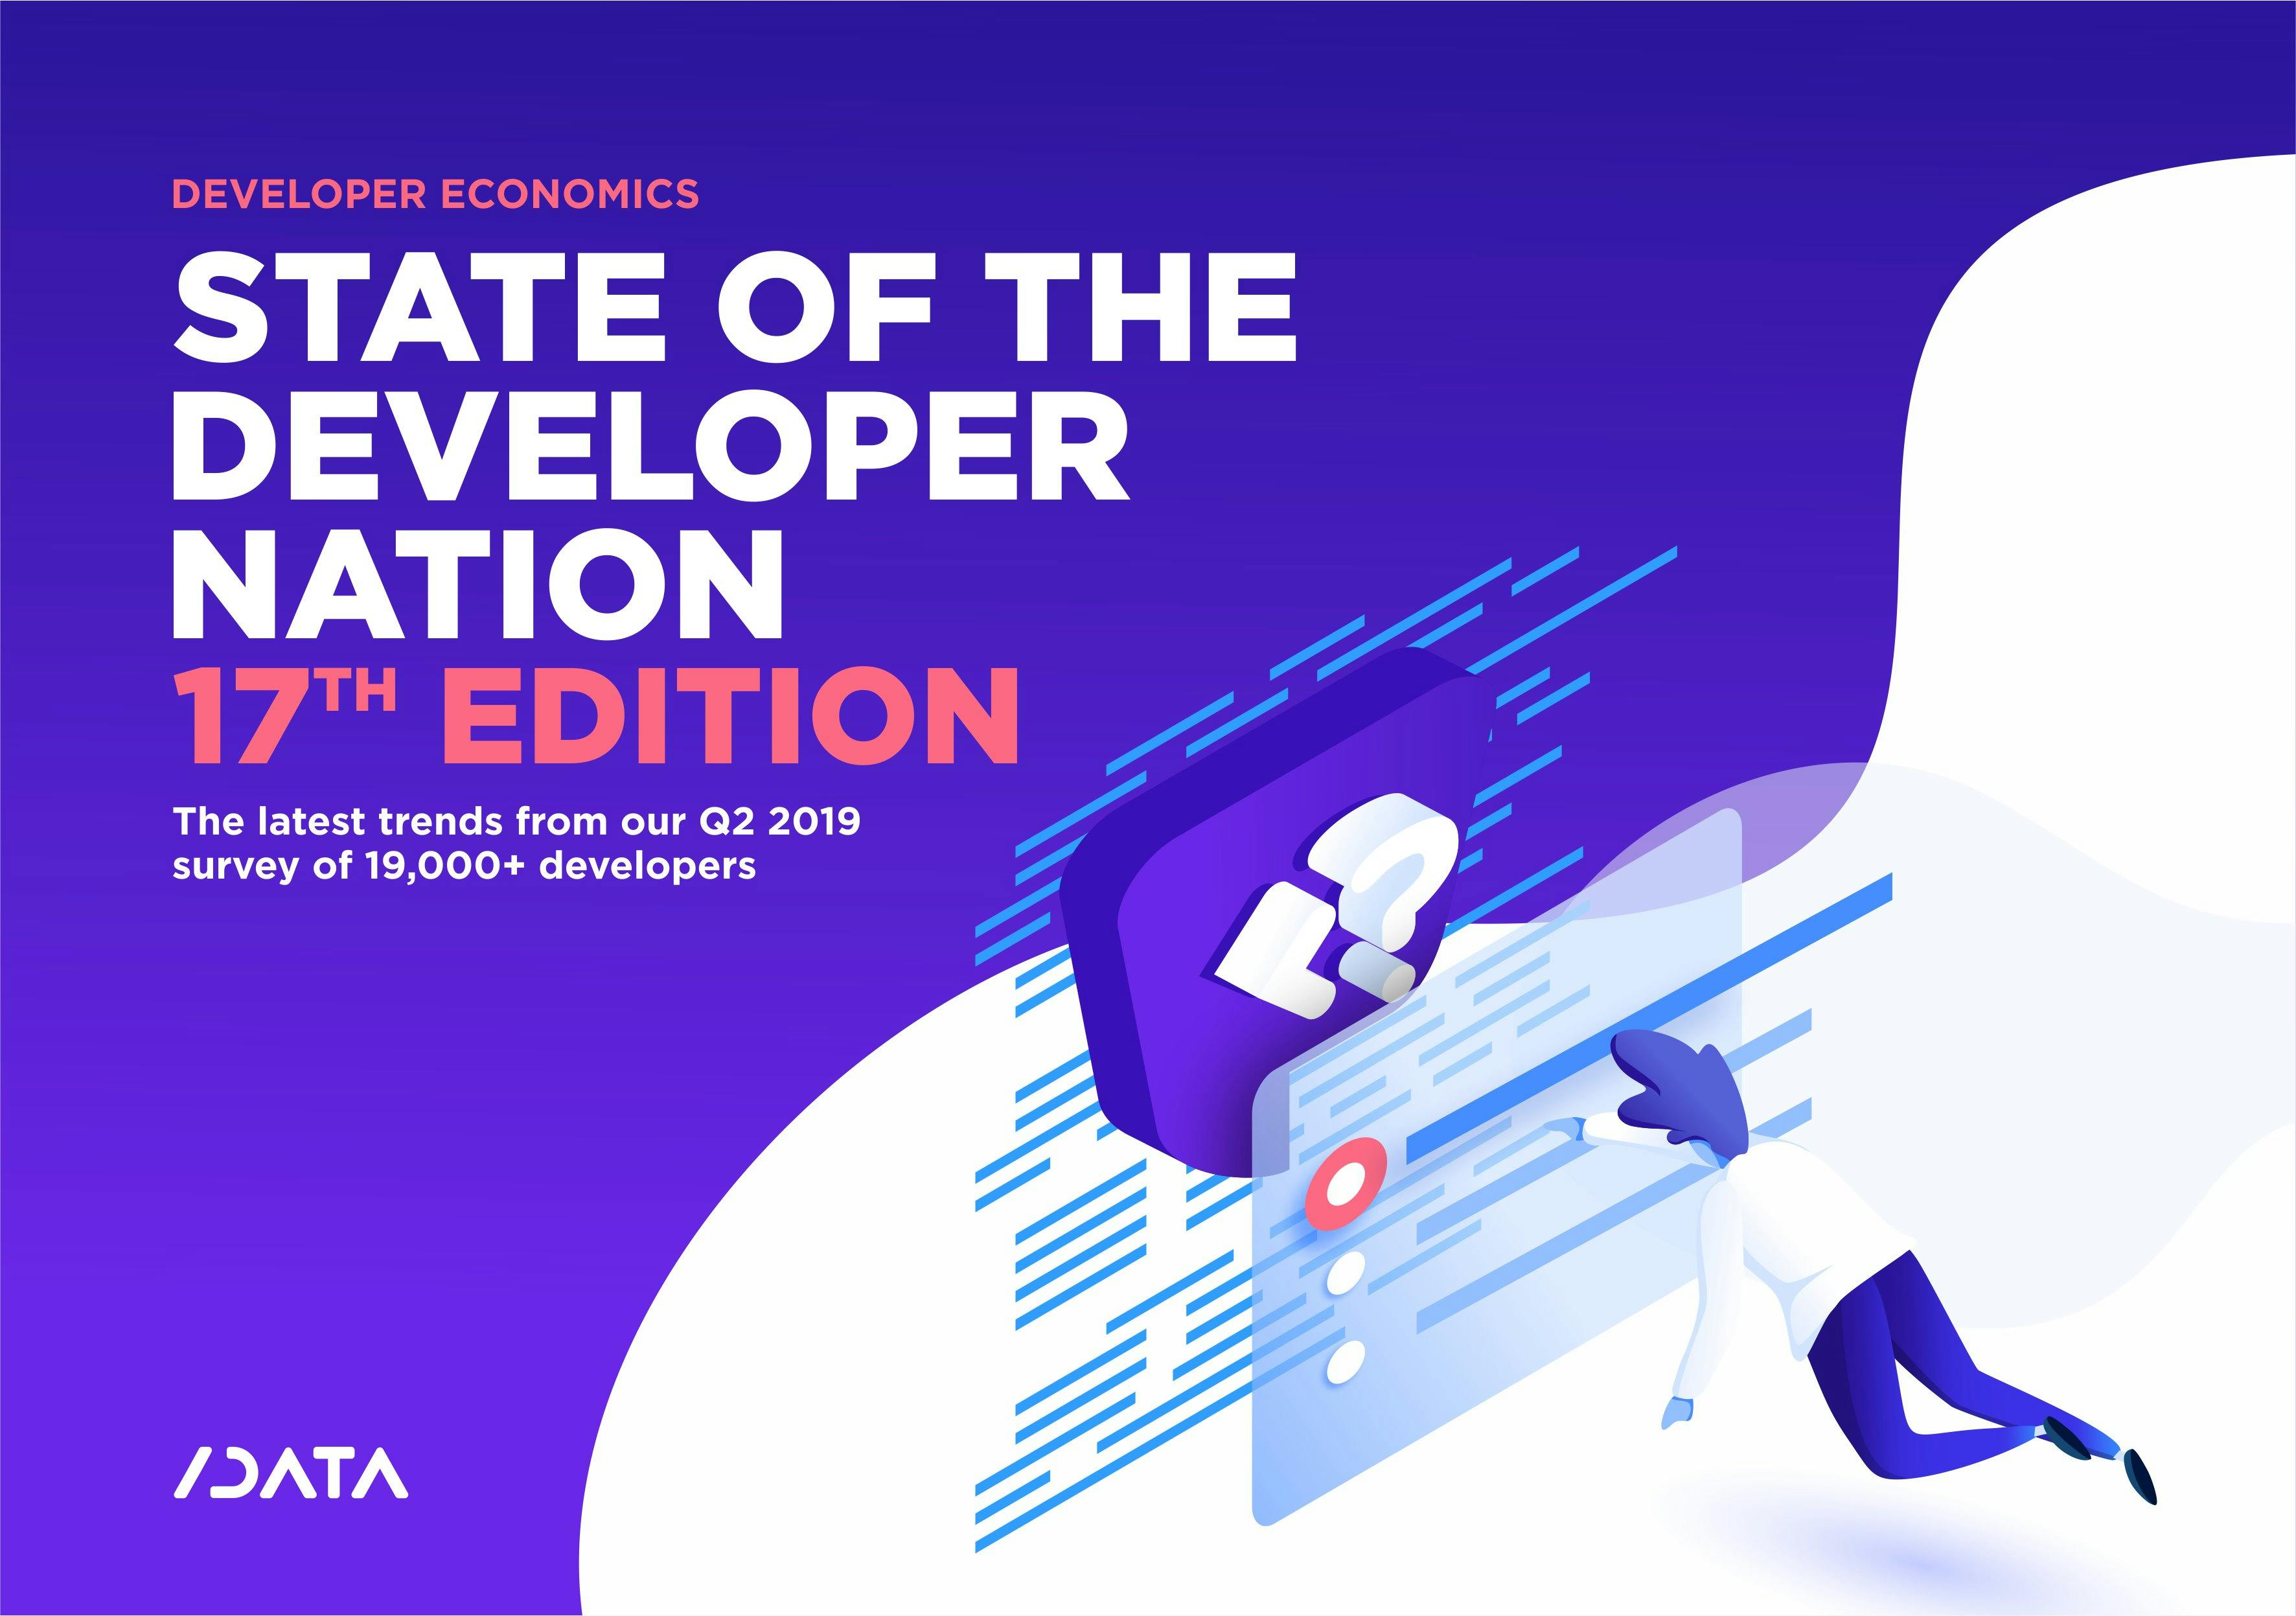 State of the Developer Nation 17th Edition - Q2 2019